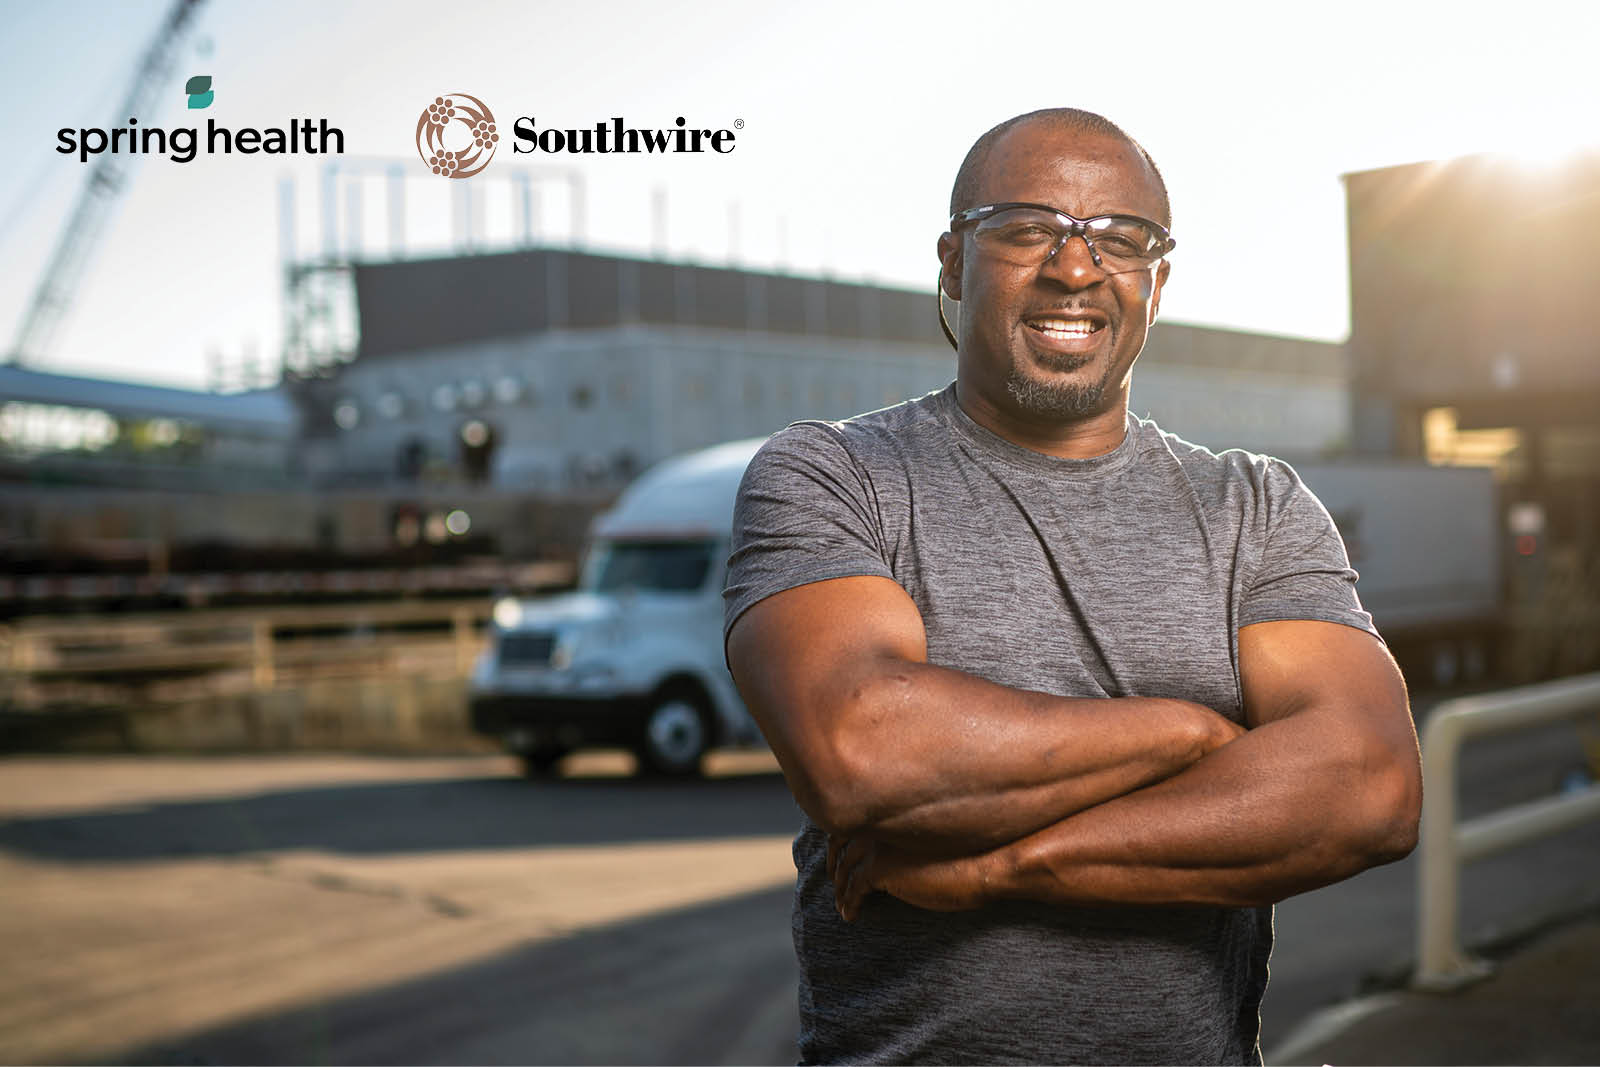 Southwire Partners with Spring Health to Provide Mental Health Benefits